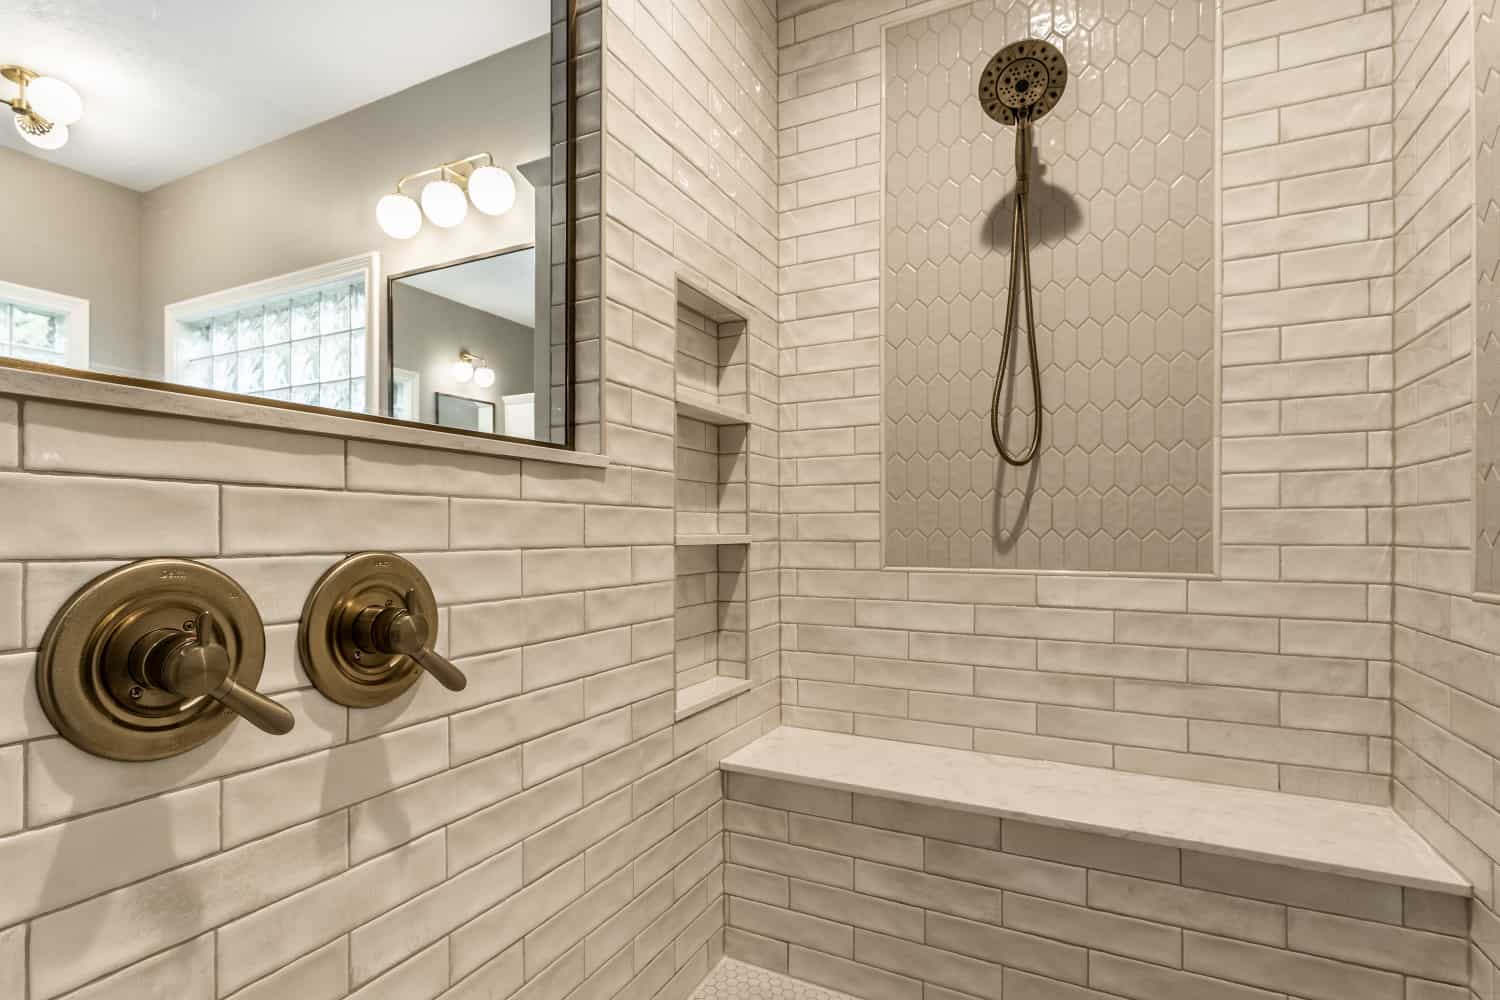 Nicholas Design Build | A modern bathroom with white tile and a brushed gold shower head.